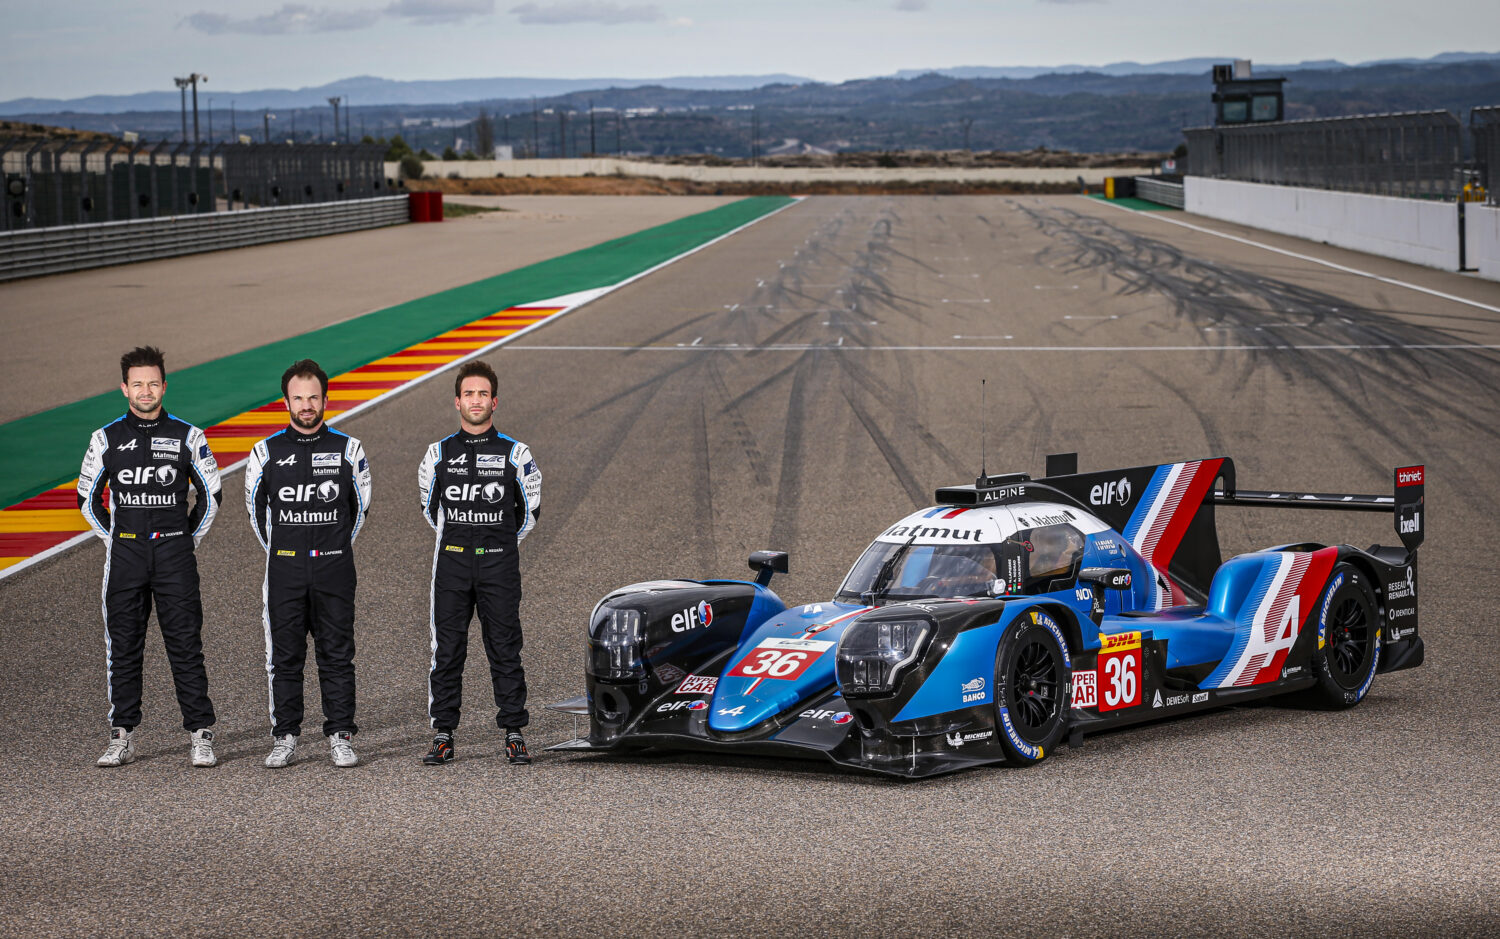 2021 - Alpine A480 - Tests Sessions on the Motorland circuit..jpeg